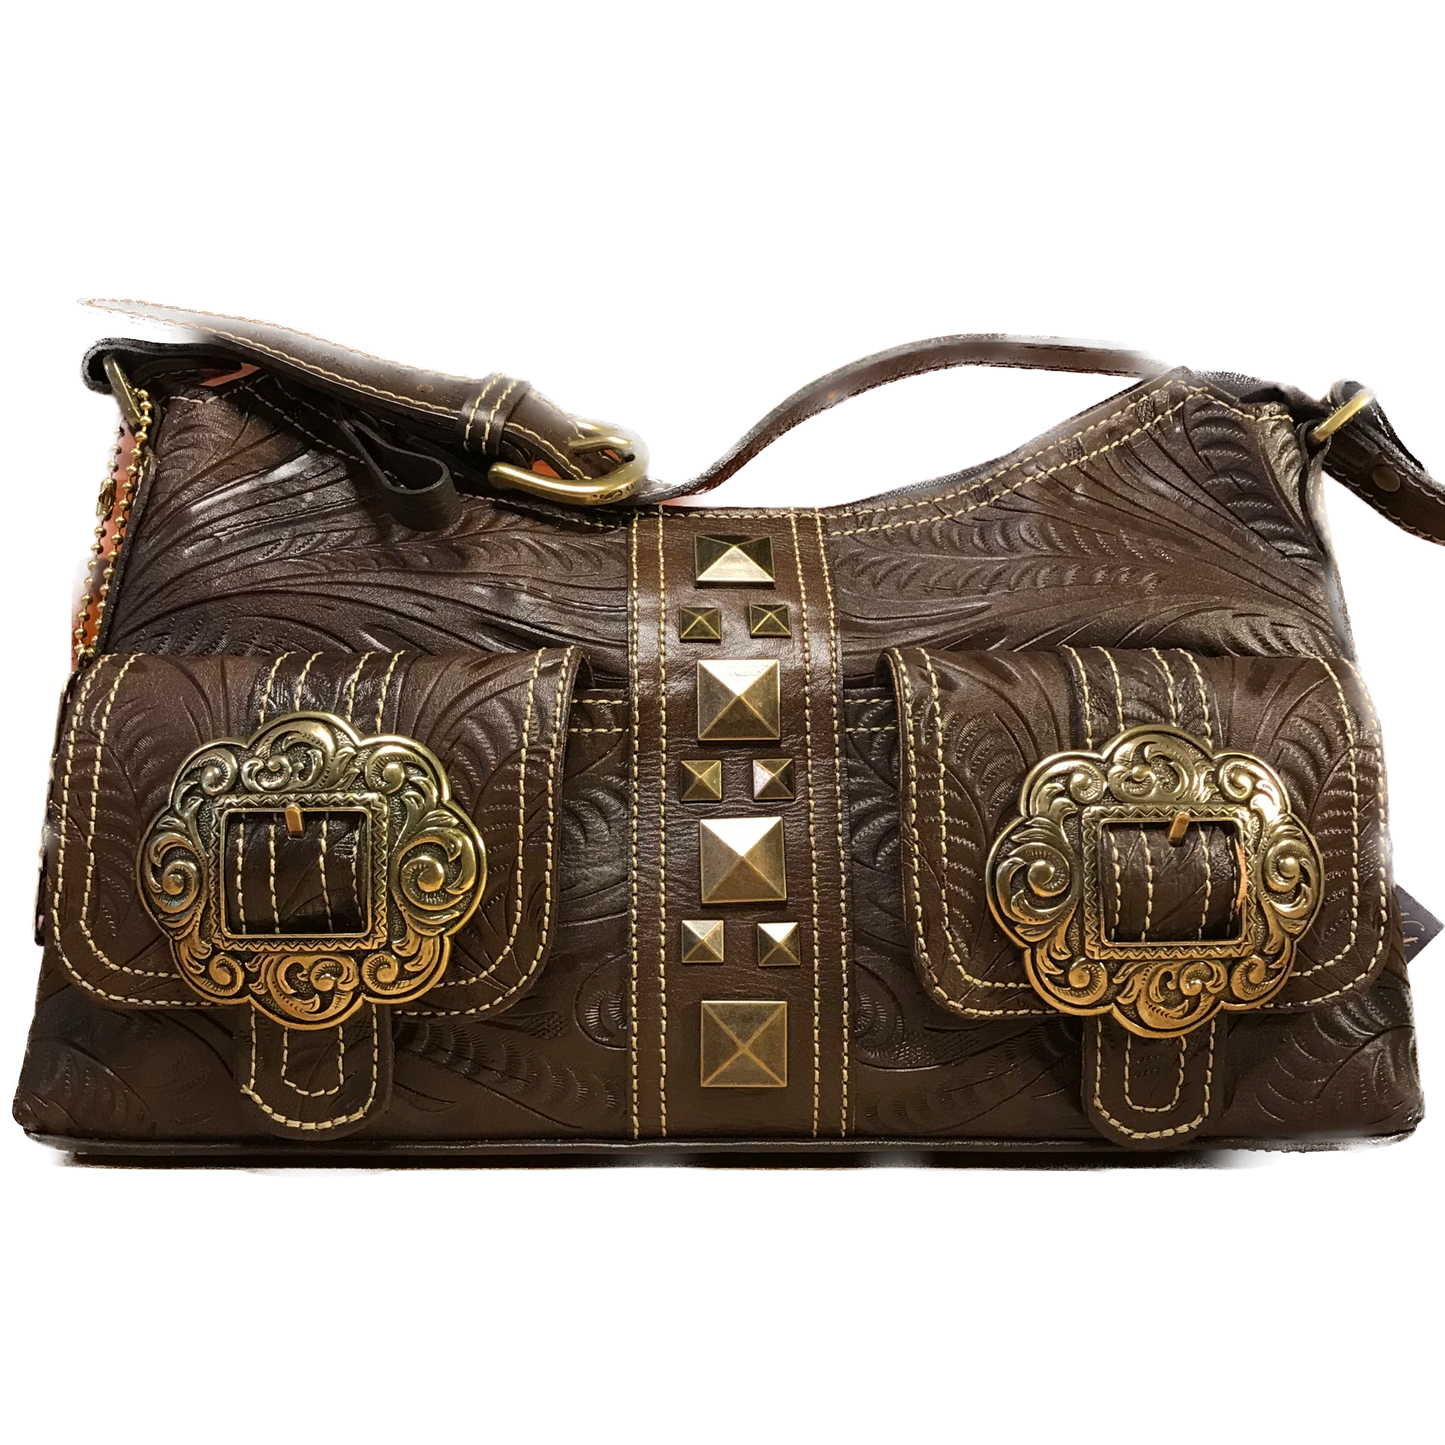 Earth Brown Leather Zip-Top Shoulder Bag with Brass Buckles